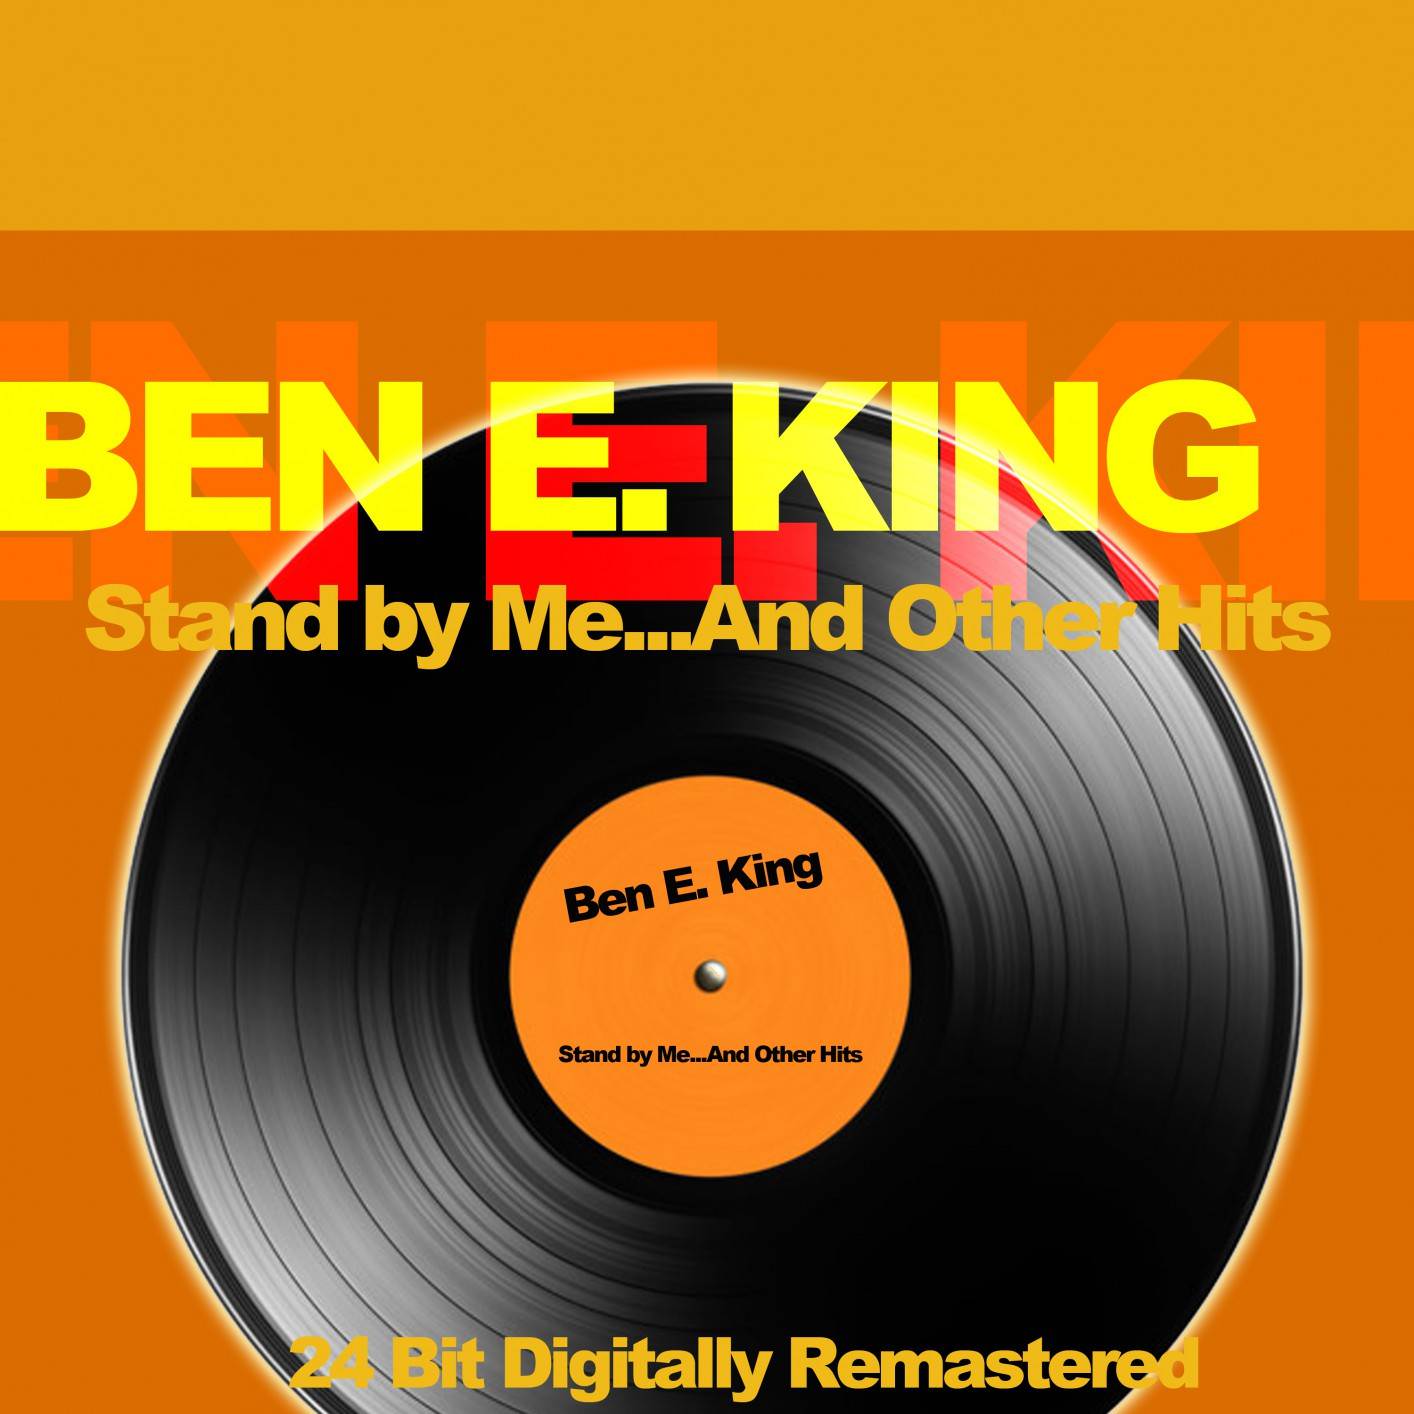 Ben E. King - Stand by Me…And Other Hits (2018) [FLAC 24bit/48kHz]